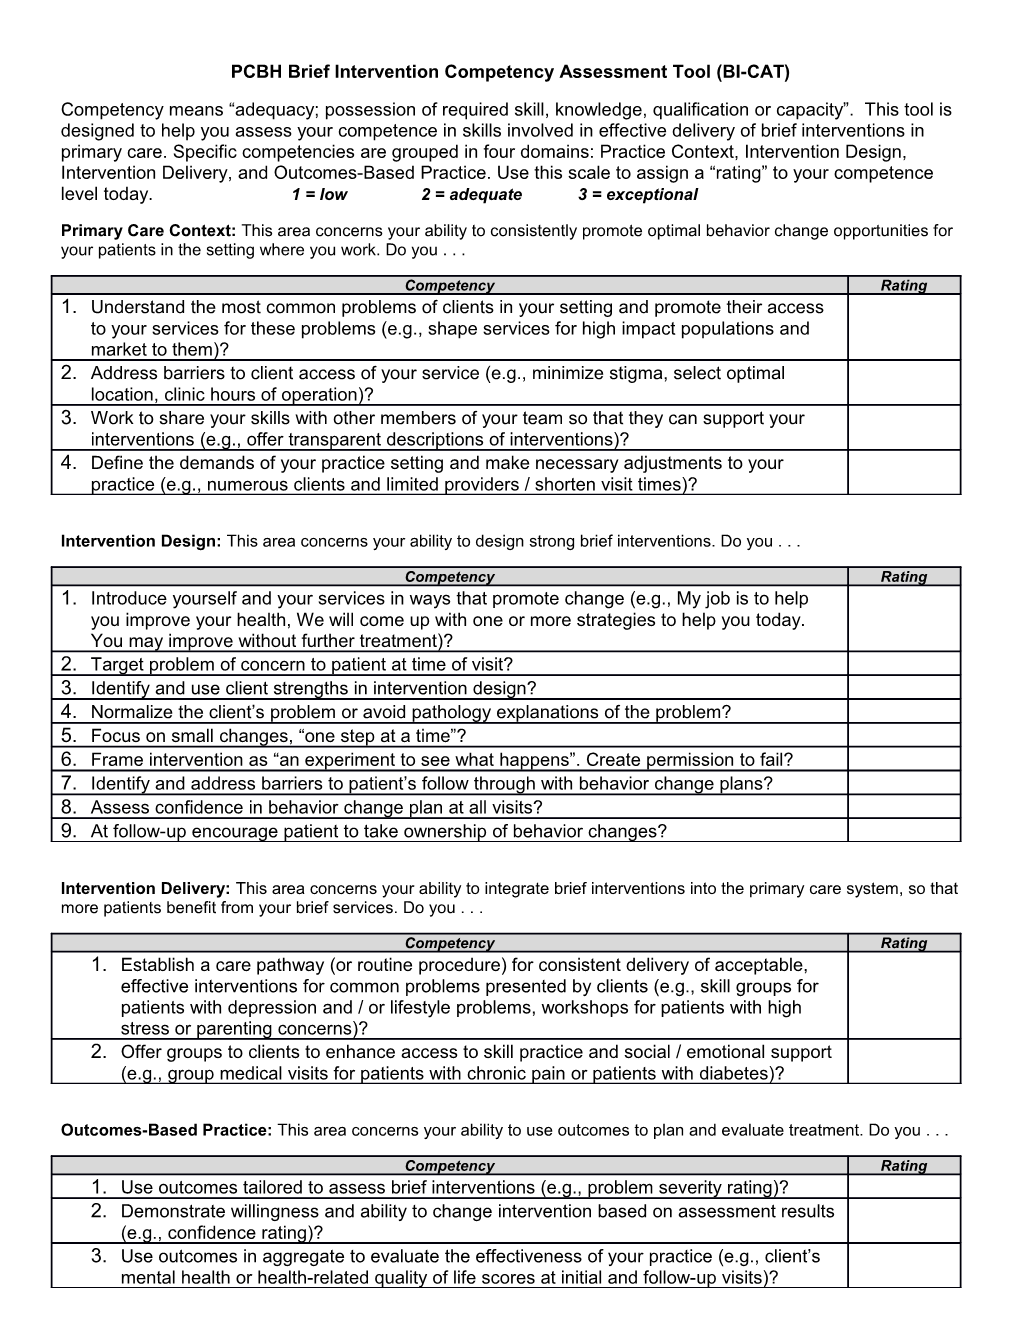 PCBH Brief Intervention Competency Assessment Tool (BI-CAT)